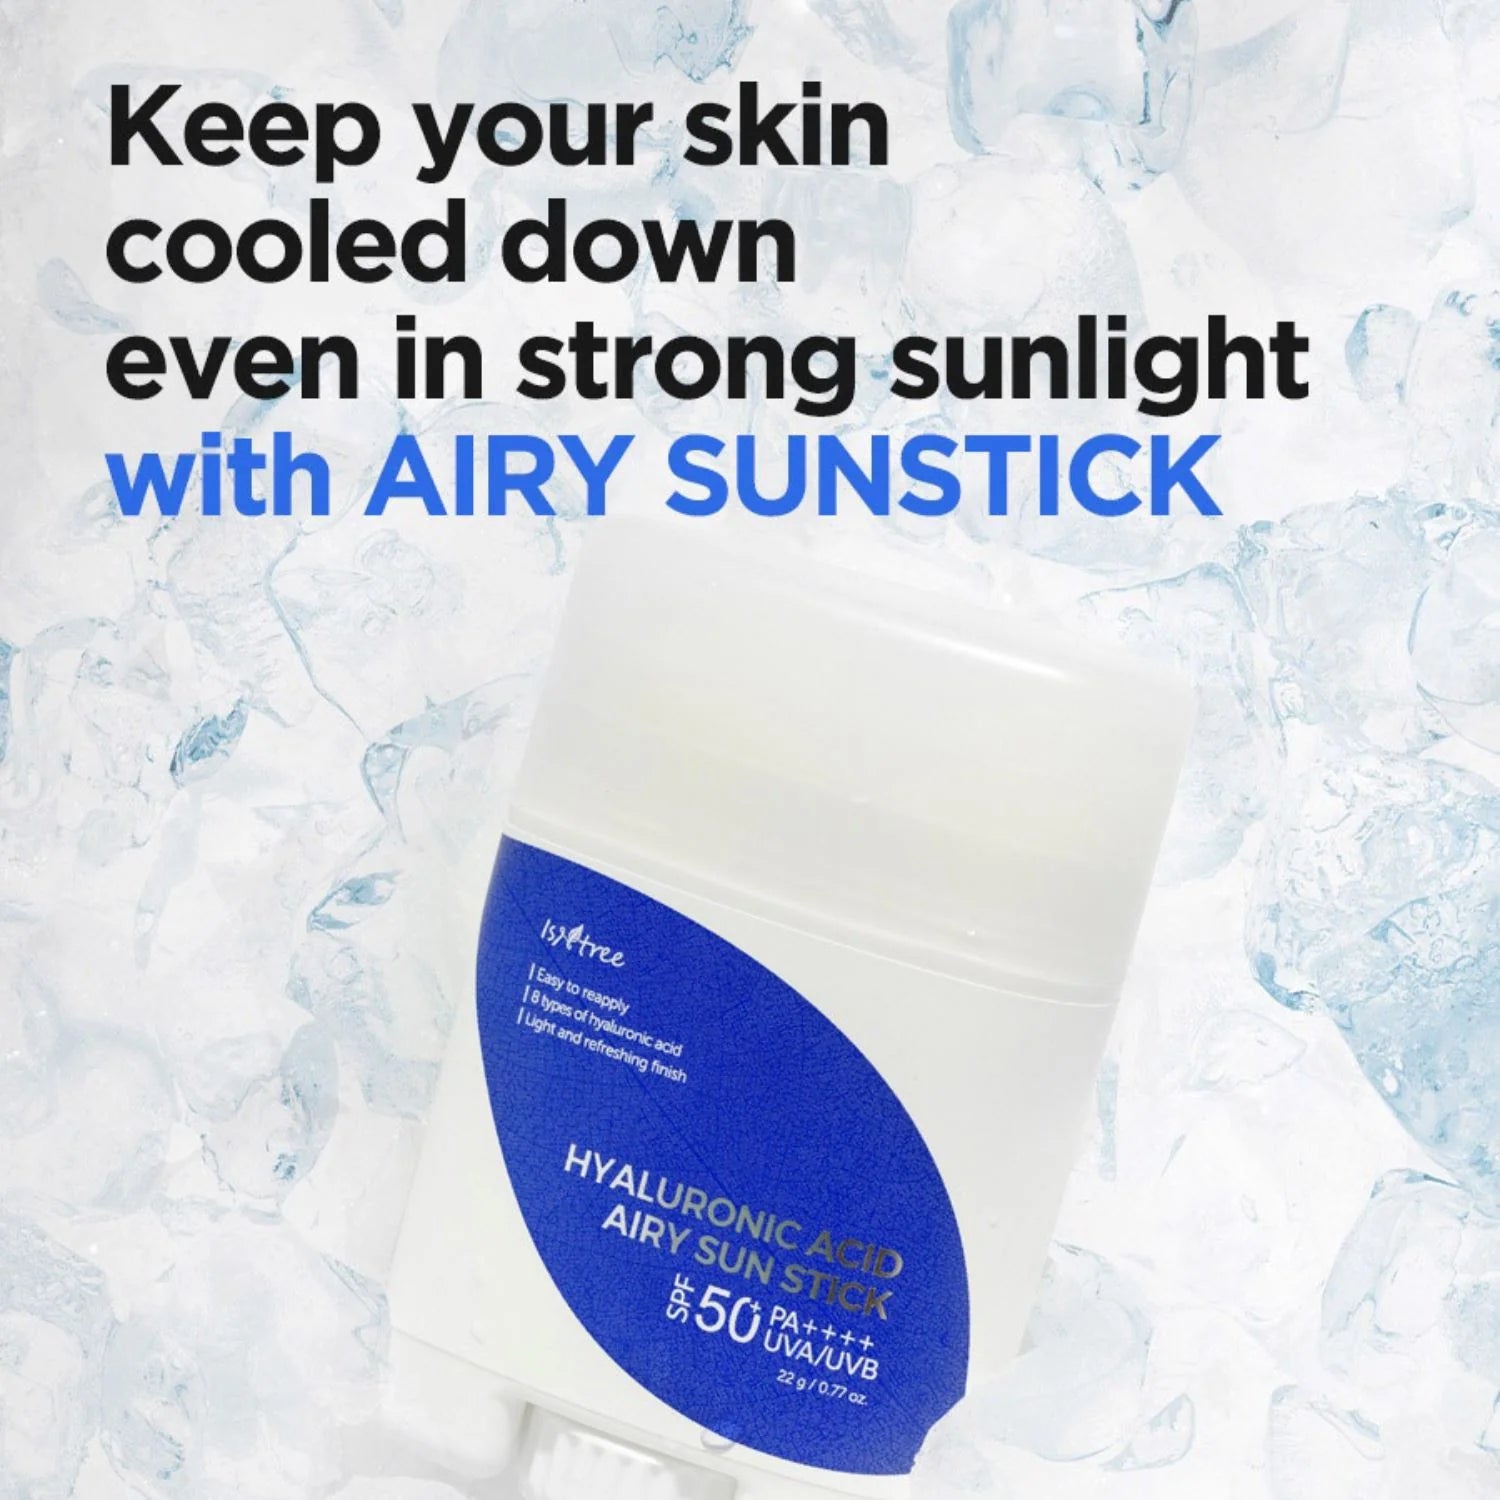 Isntree Hyaluronic Acid Airy Sun Stick